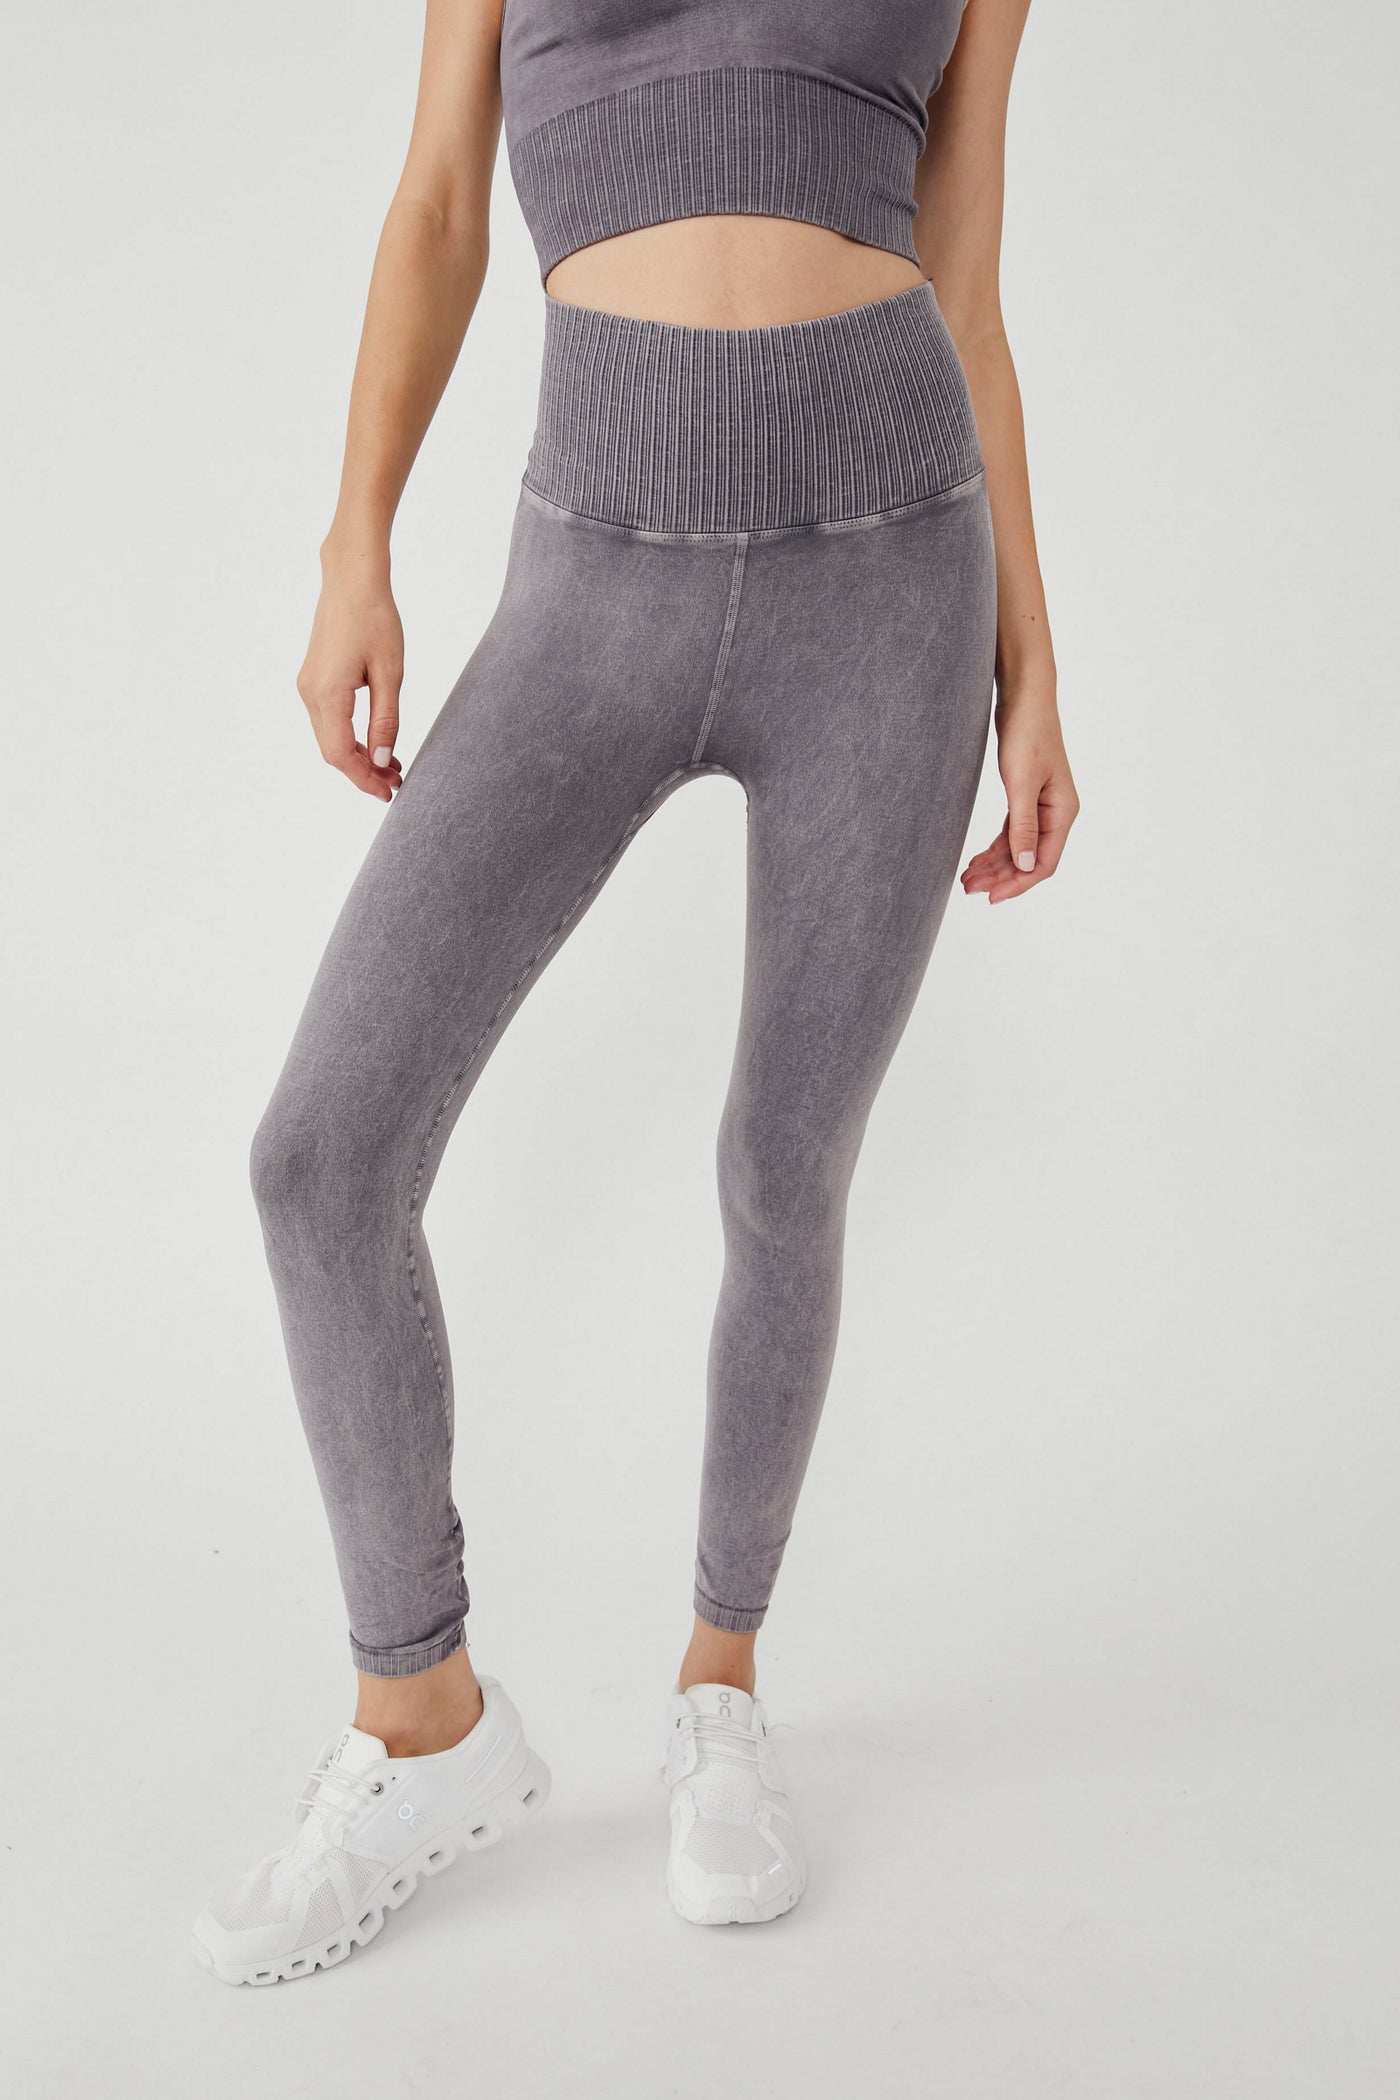 Free People Movement Washed Barely There Yoga Legging XS / S new without  tag